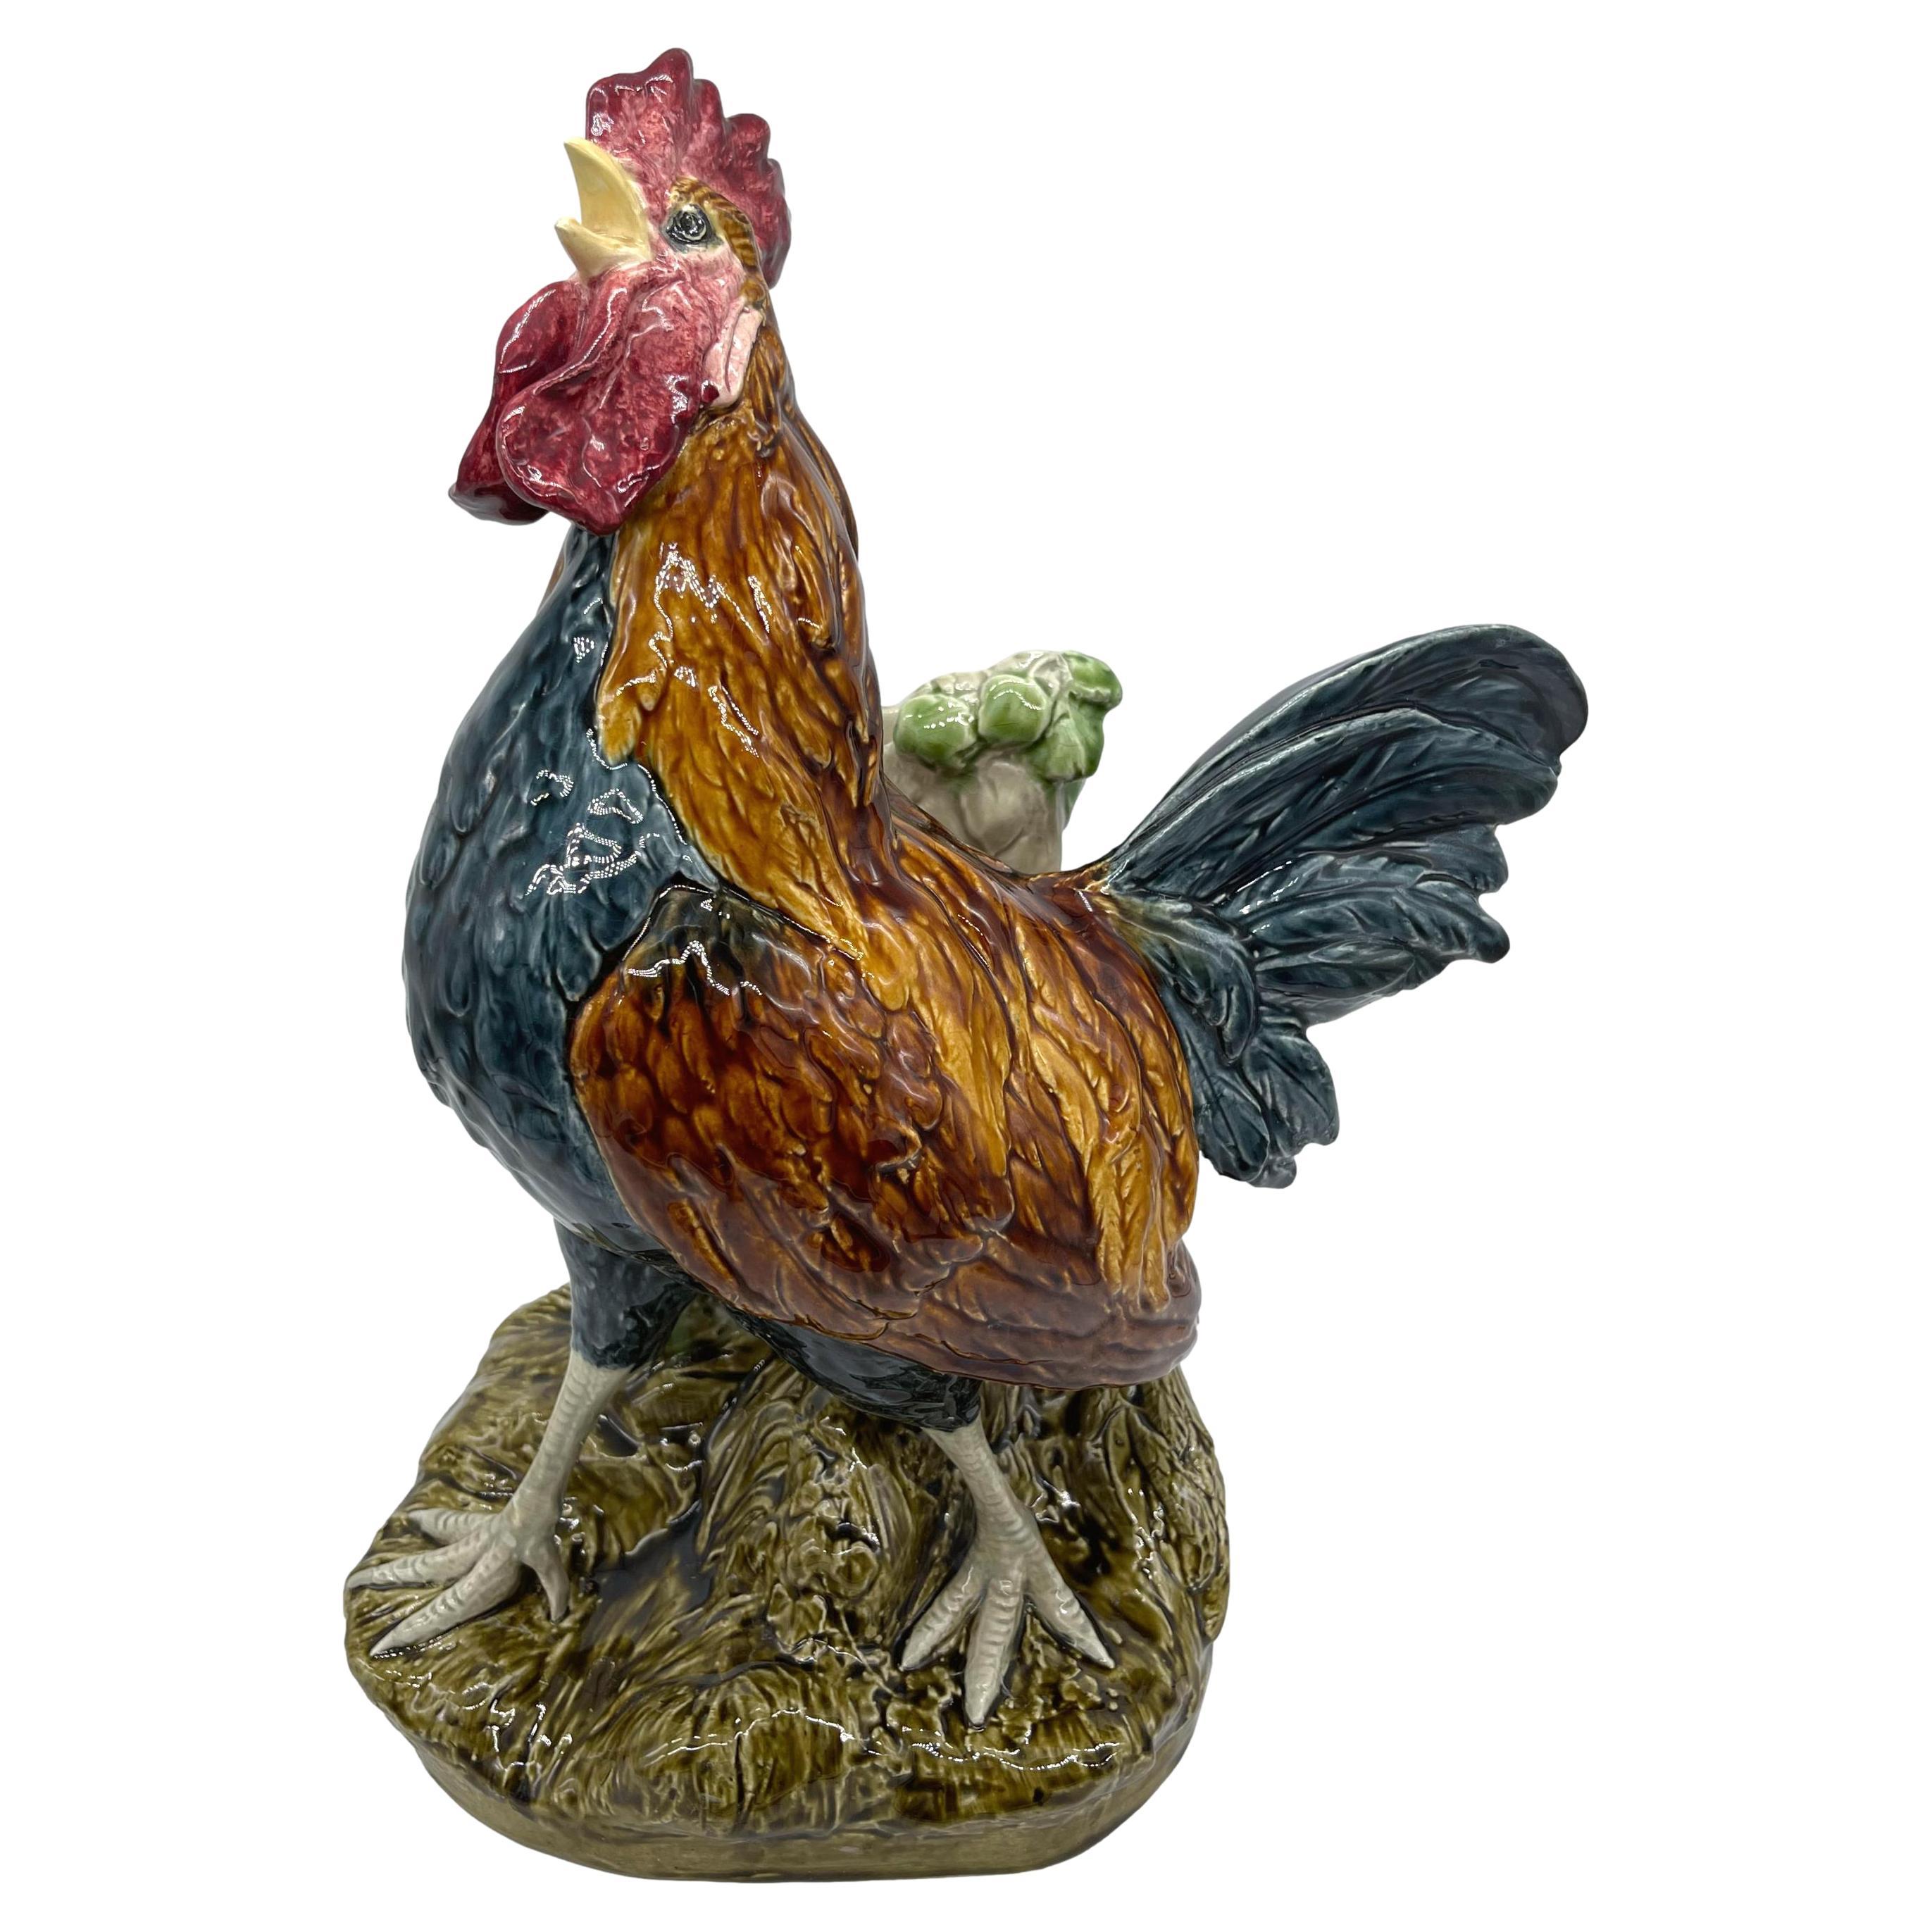 Majolica Rooster Large Spill Vase Signed Louis Carrier-Belleuse, French, ca 1890 For Sale